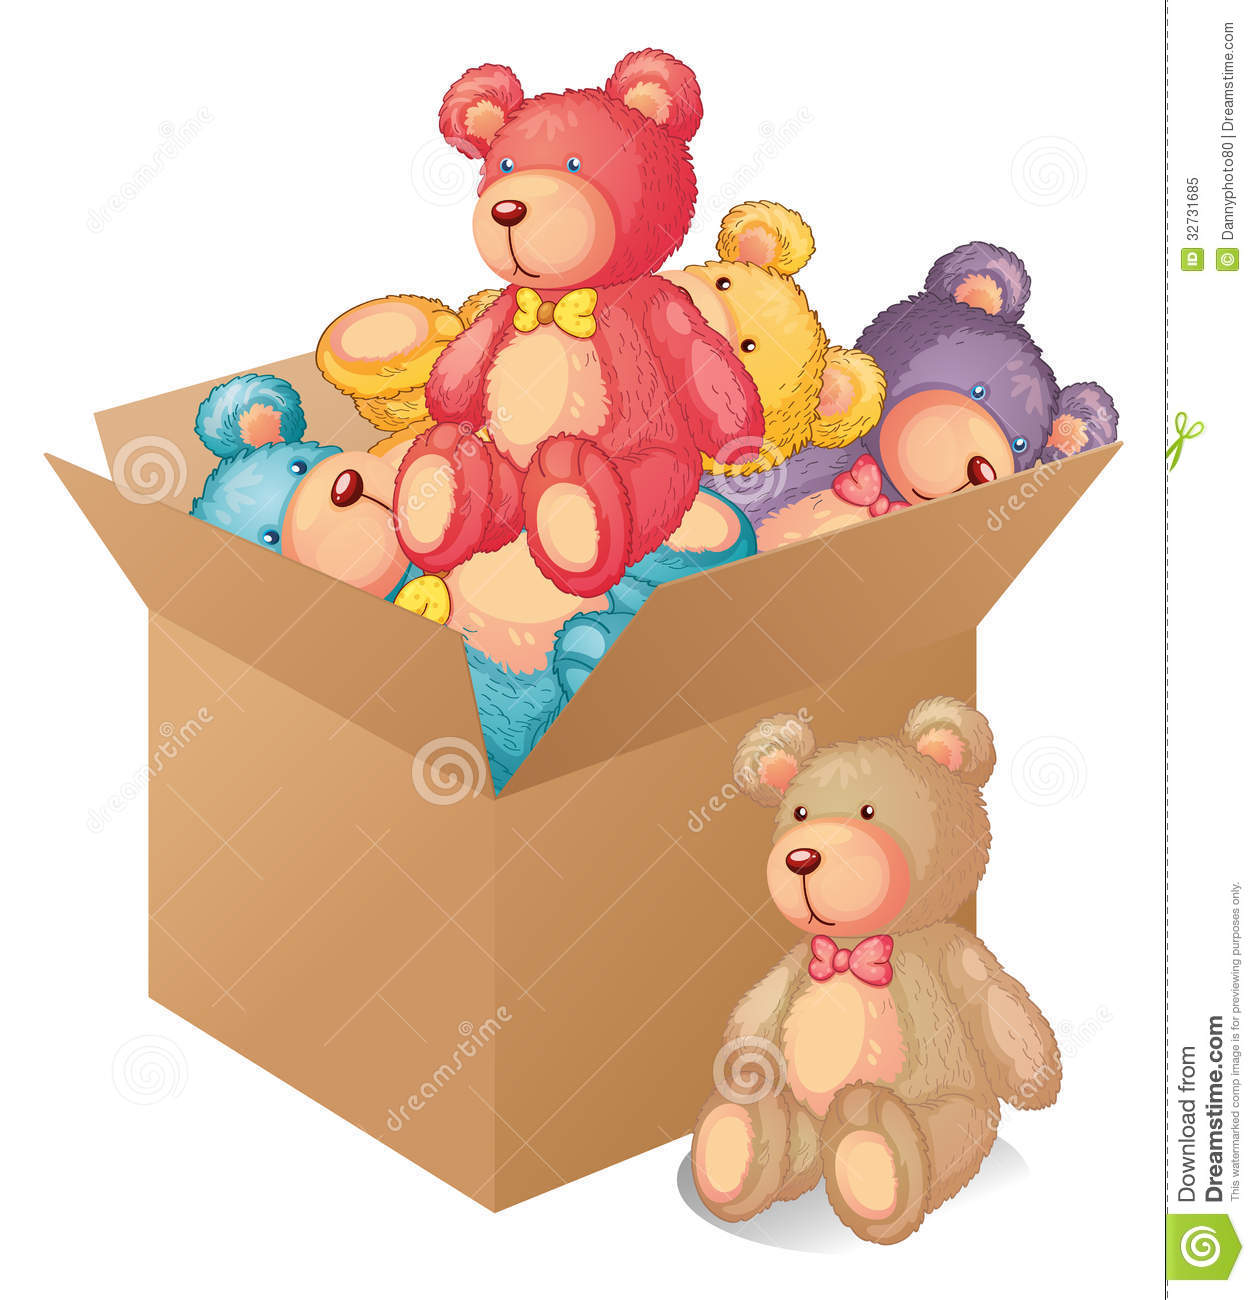 full toy box clipart